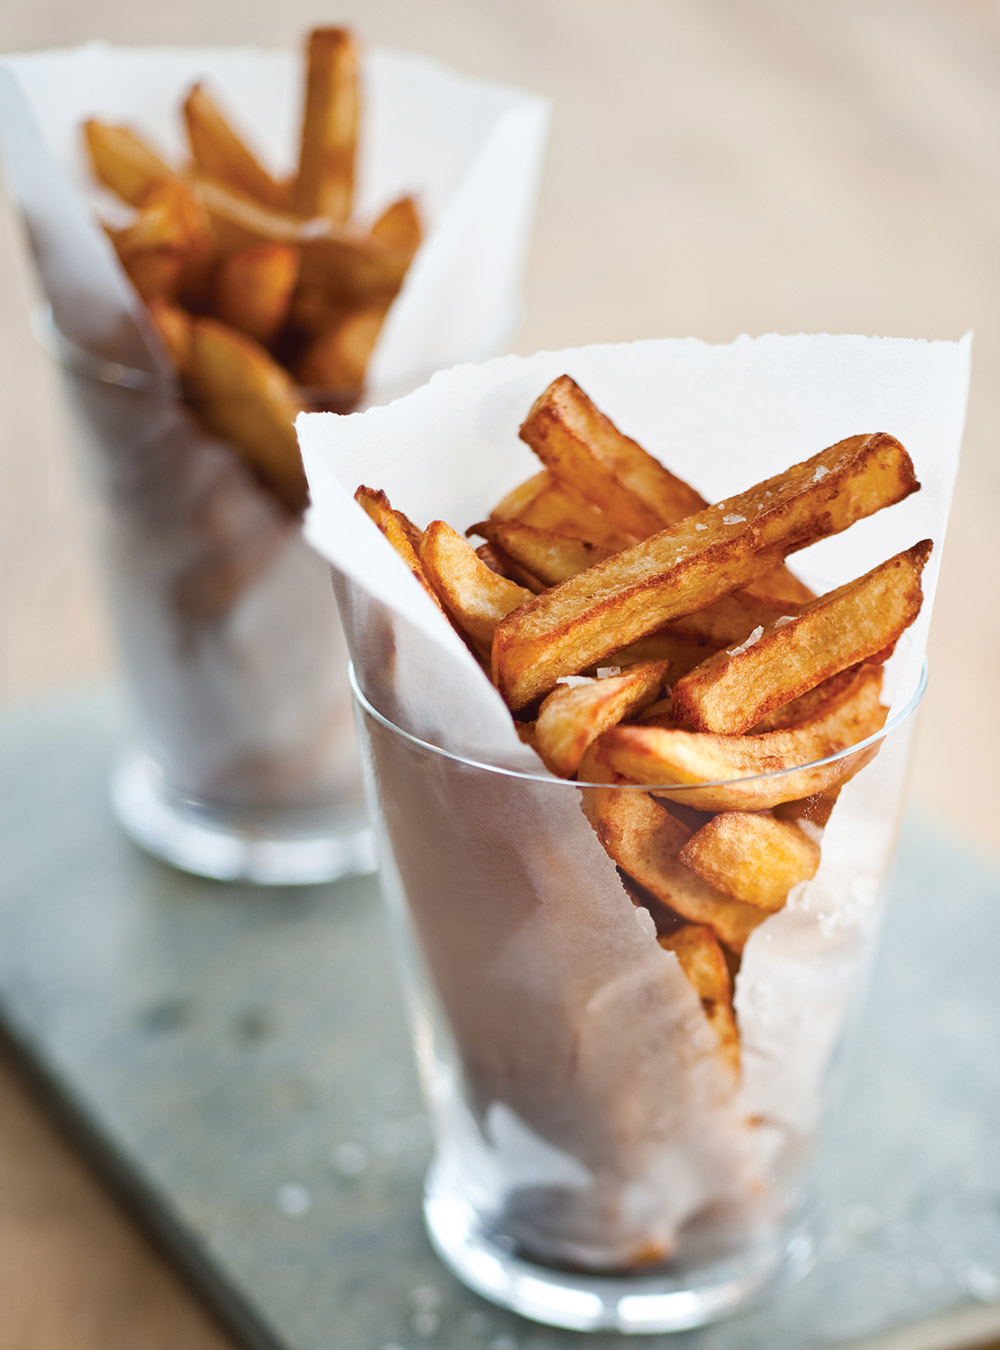 French Fries (The Best)